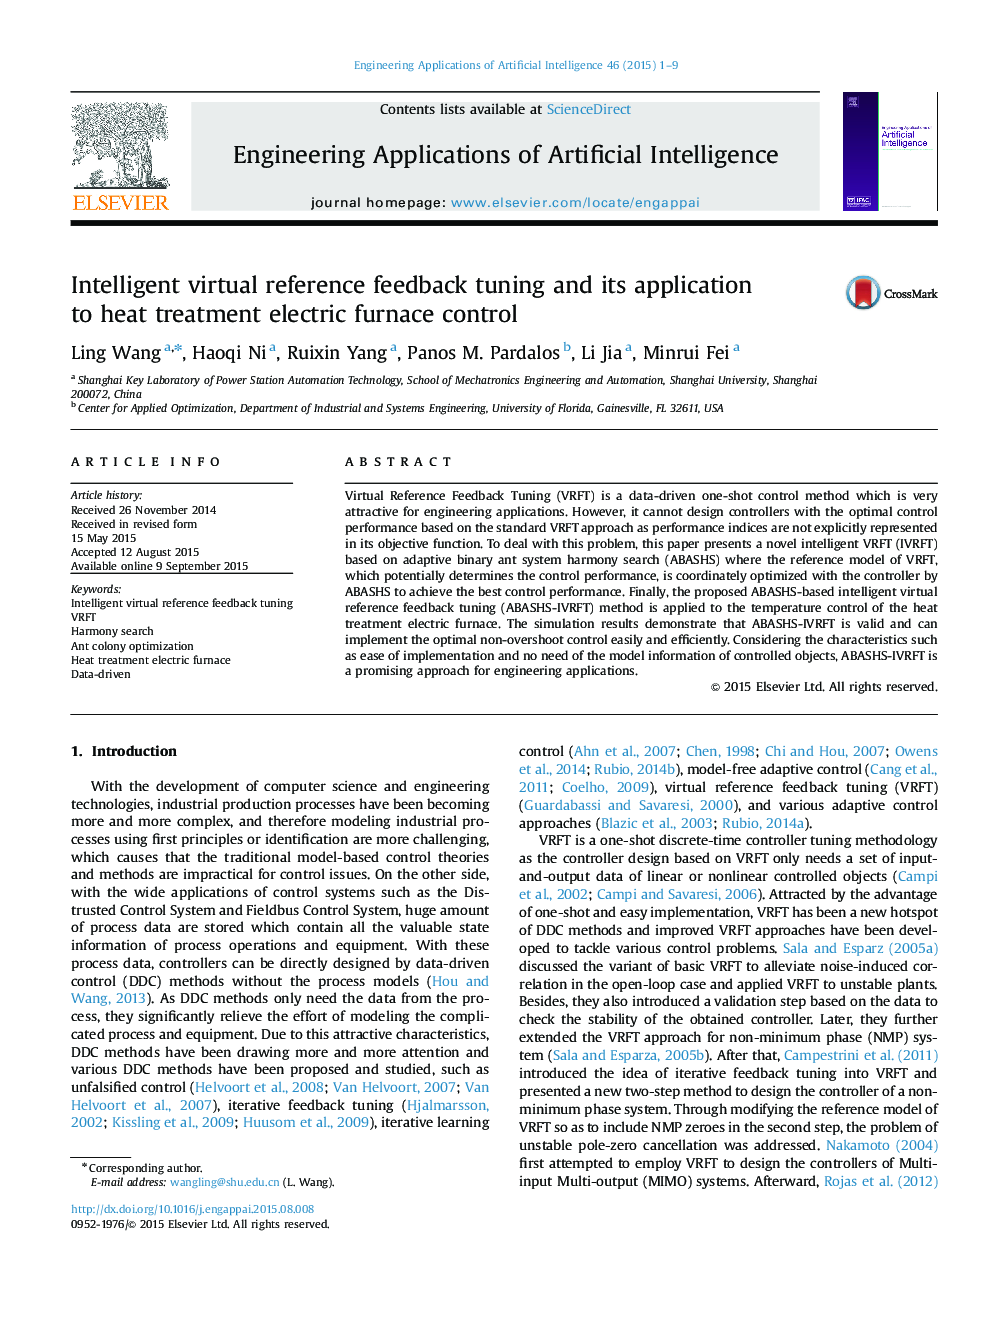 Intelligent virtual reference feedback tuning and its application to heat treatment electric furnace control